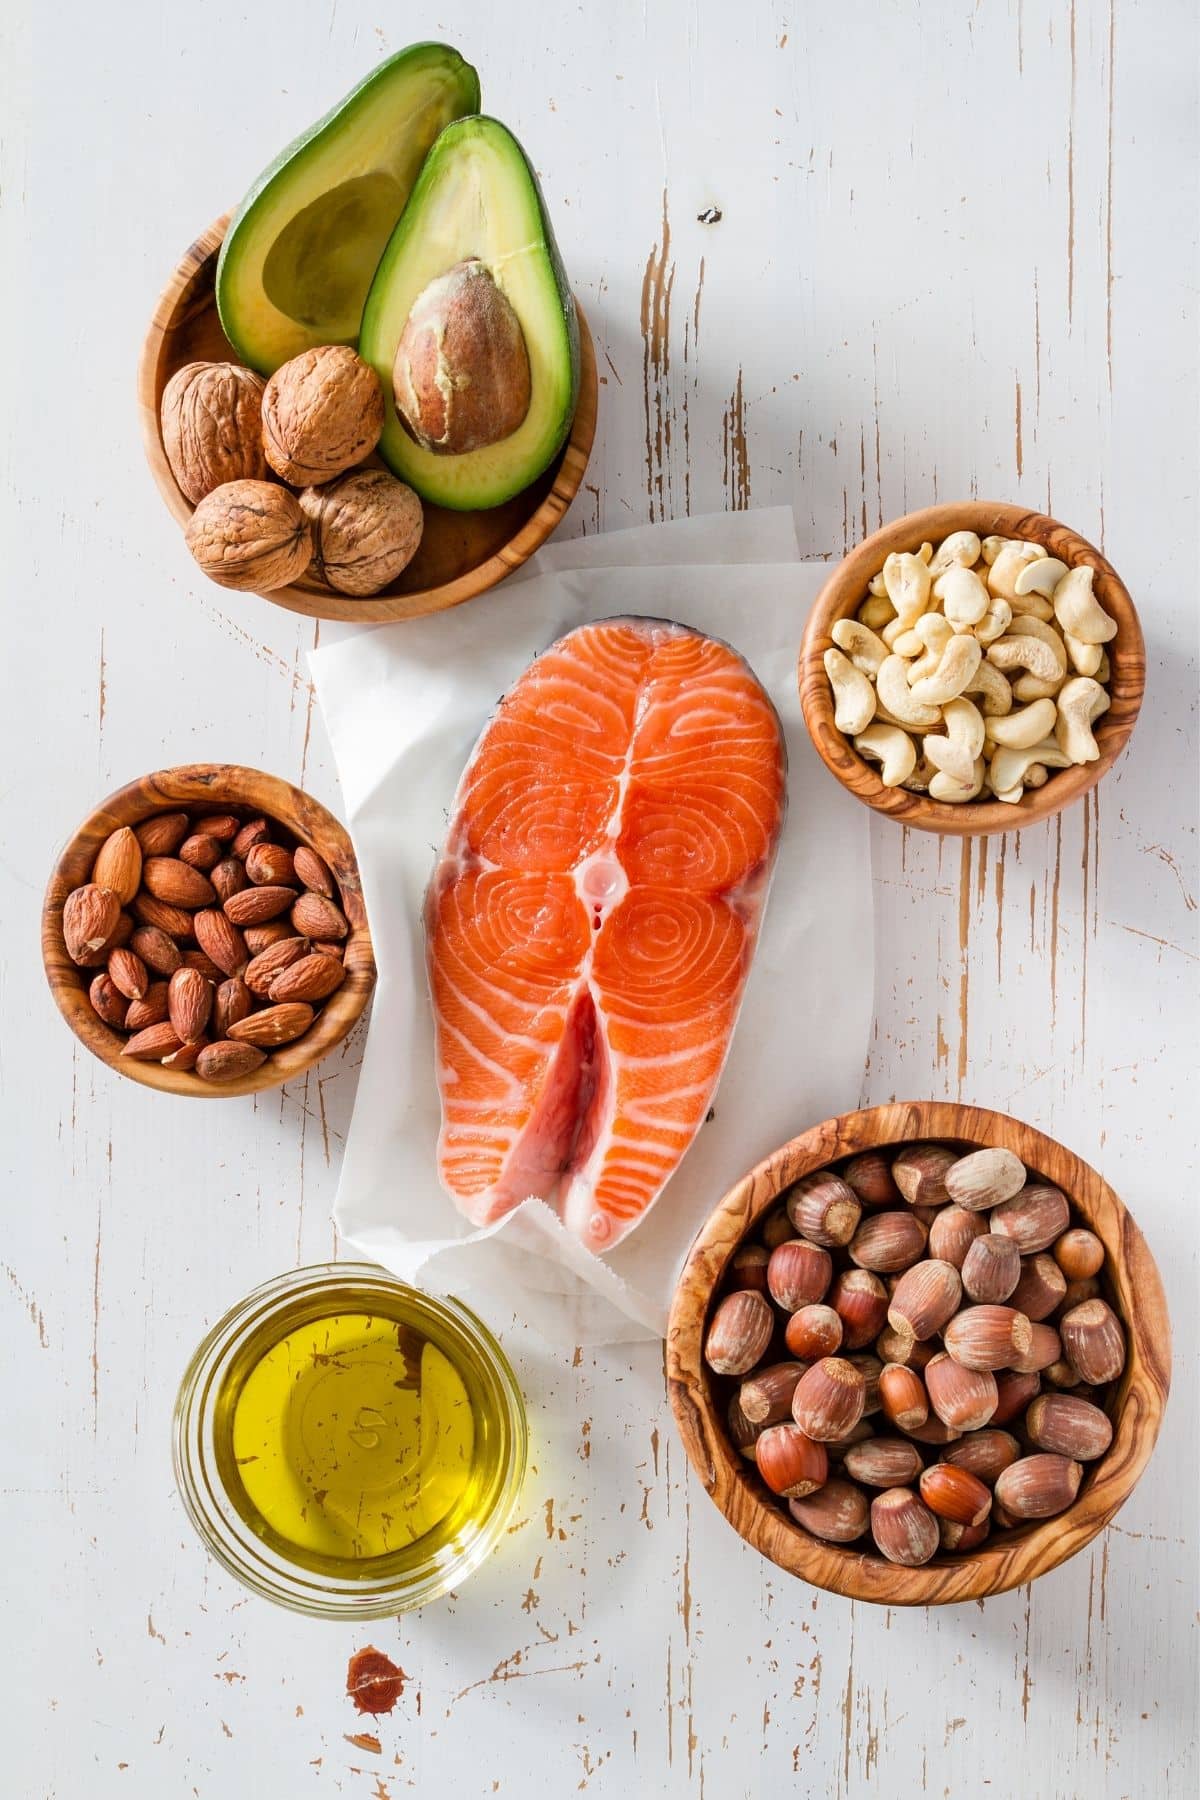 food sources of healthy fats and protein on a table.